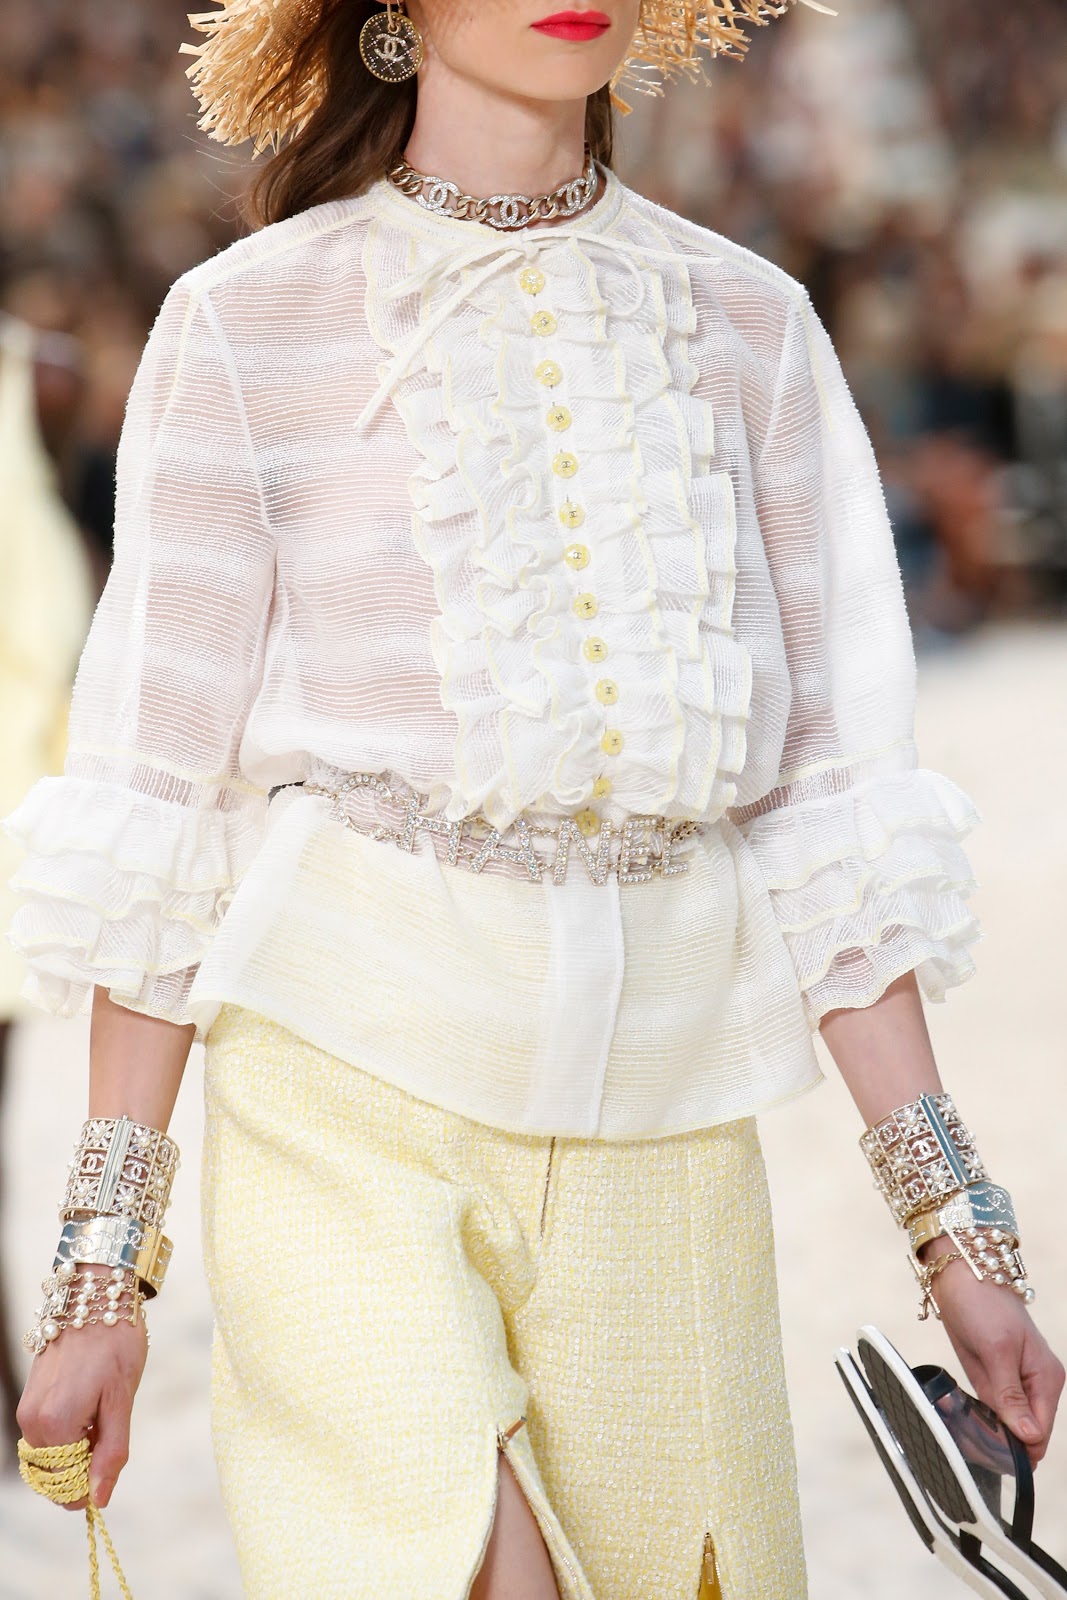 Chanel Spring 2019 Couture Collection | Cool Chic Style Fashion